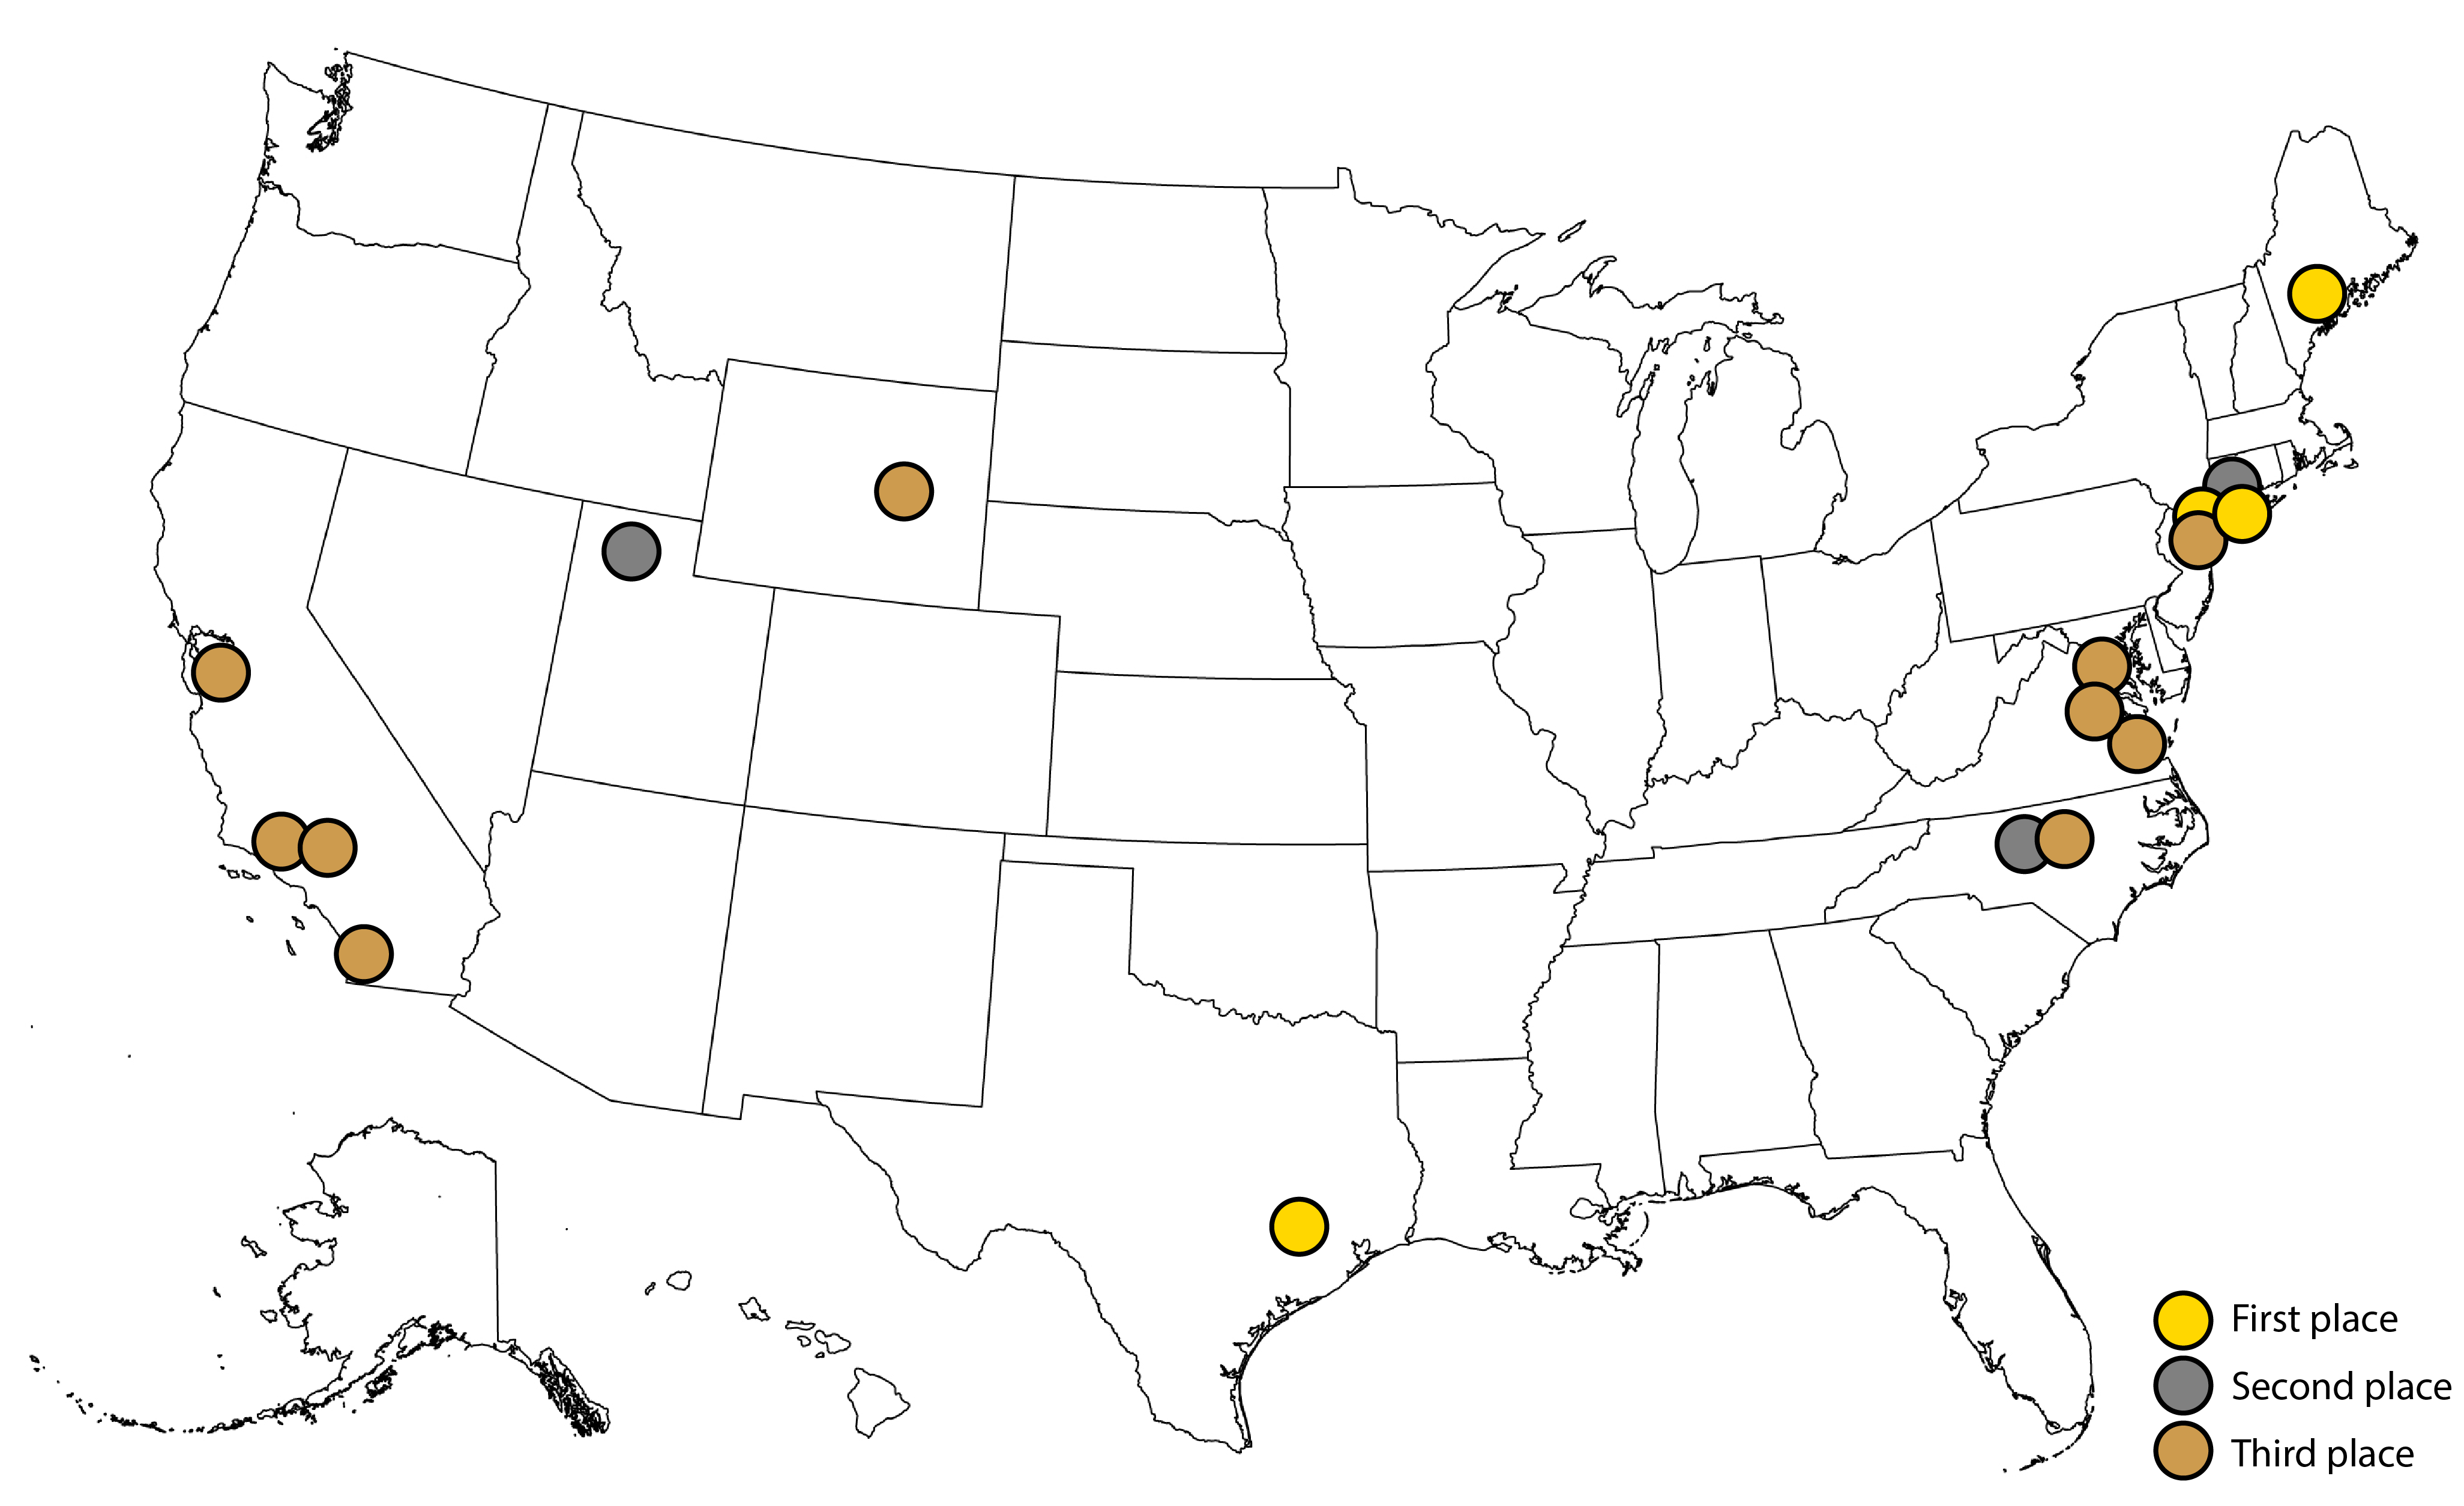 A map of winners of the P2 challenge color coded by placement (first, second, and third).